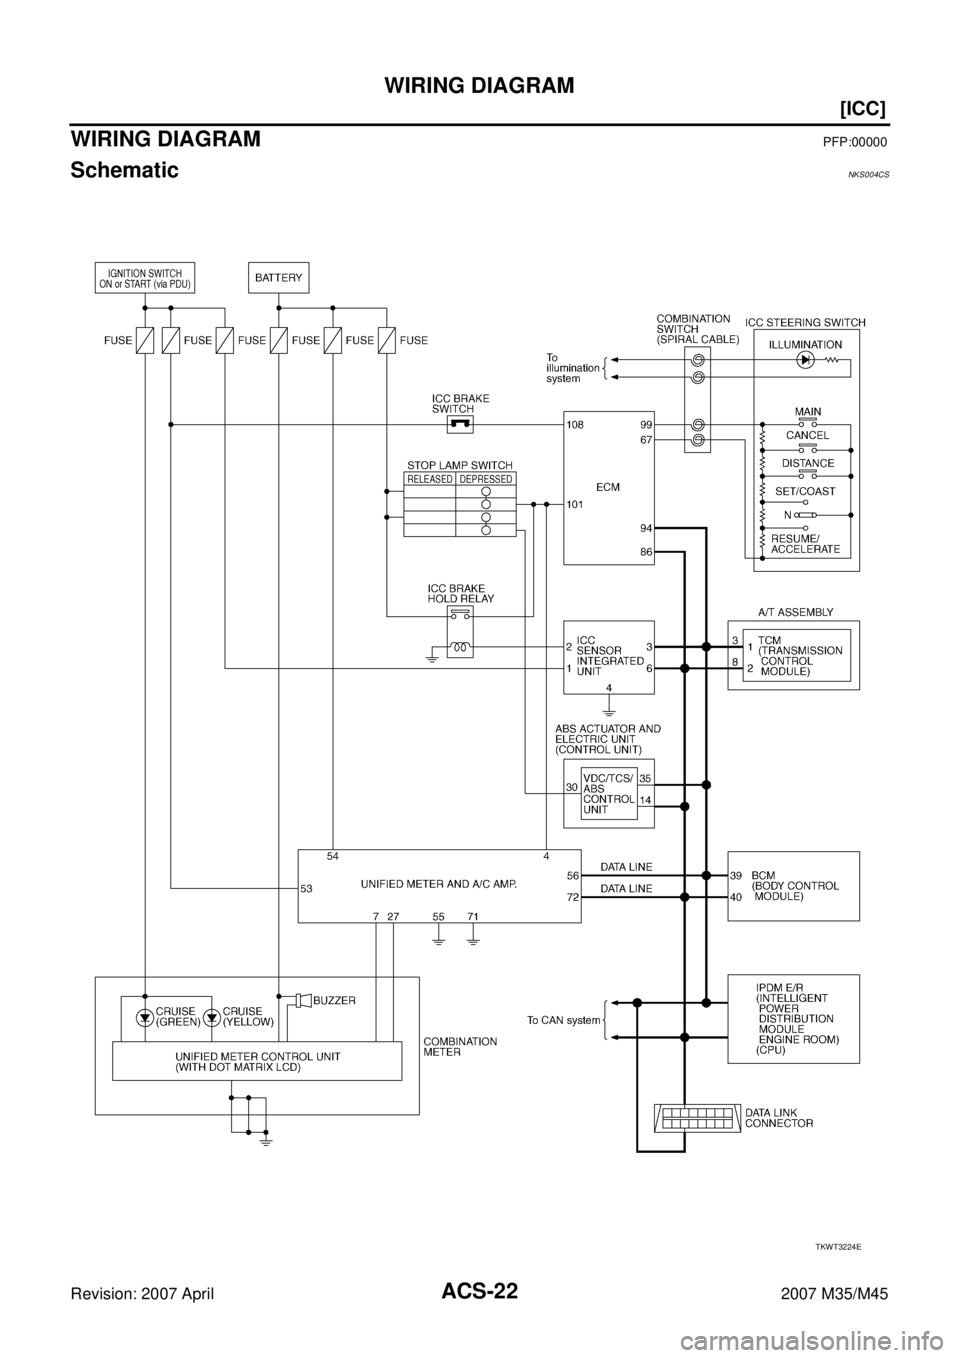 INFINITI M35 2007  Factory Owners Guide ACS-22
[ICC]
WIRING DIAGRAM
Revision: 2007 April2007 M35/M45
WIRING DIAGRAMPFP:00000
SchematicNKS004CS
TKWT3224E 